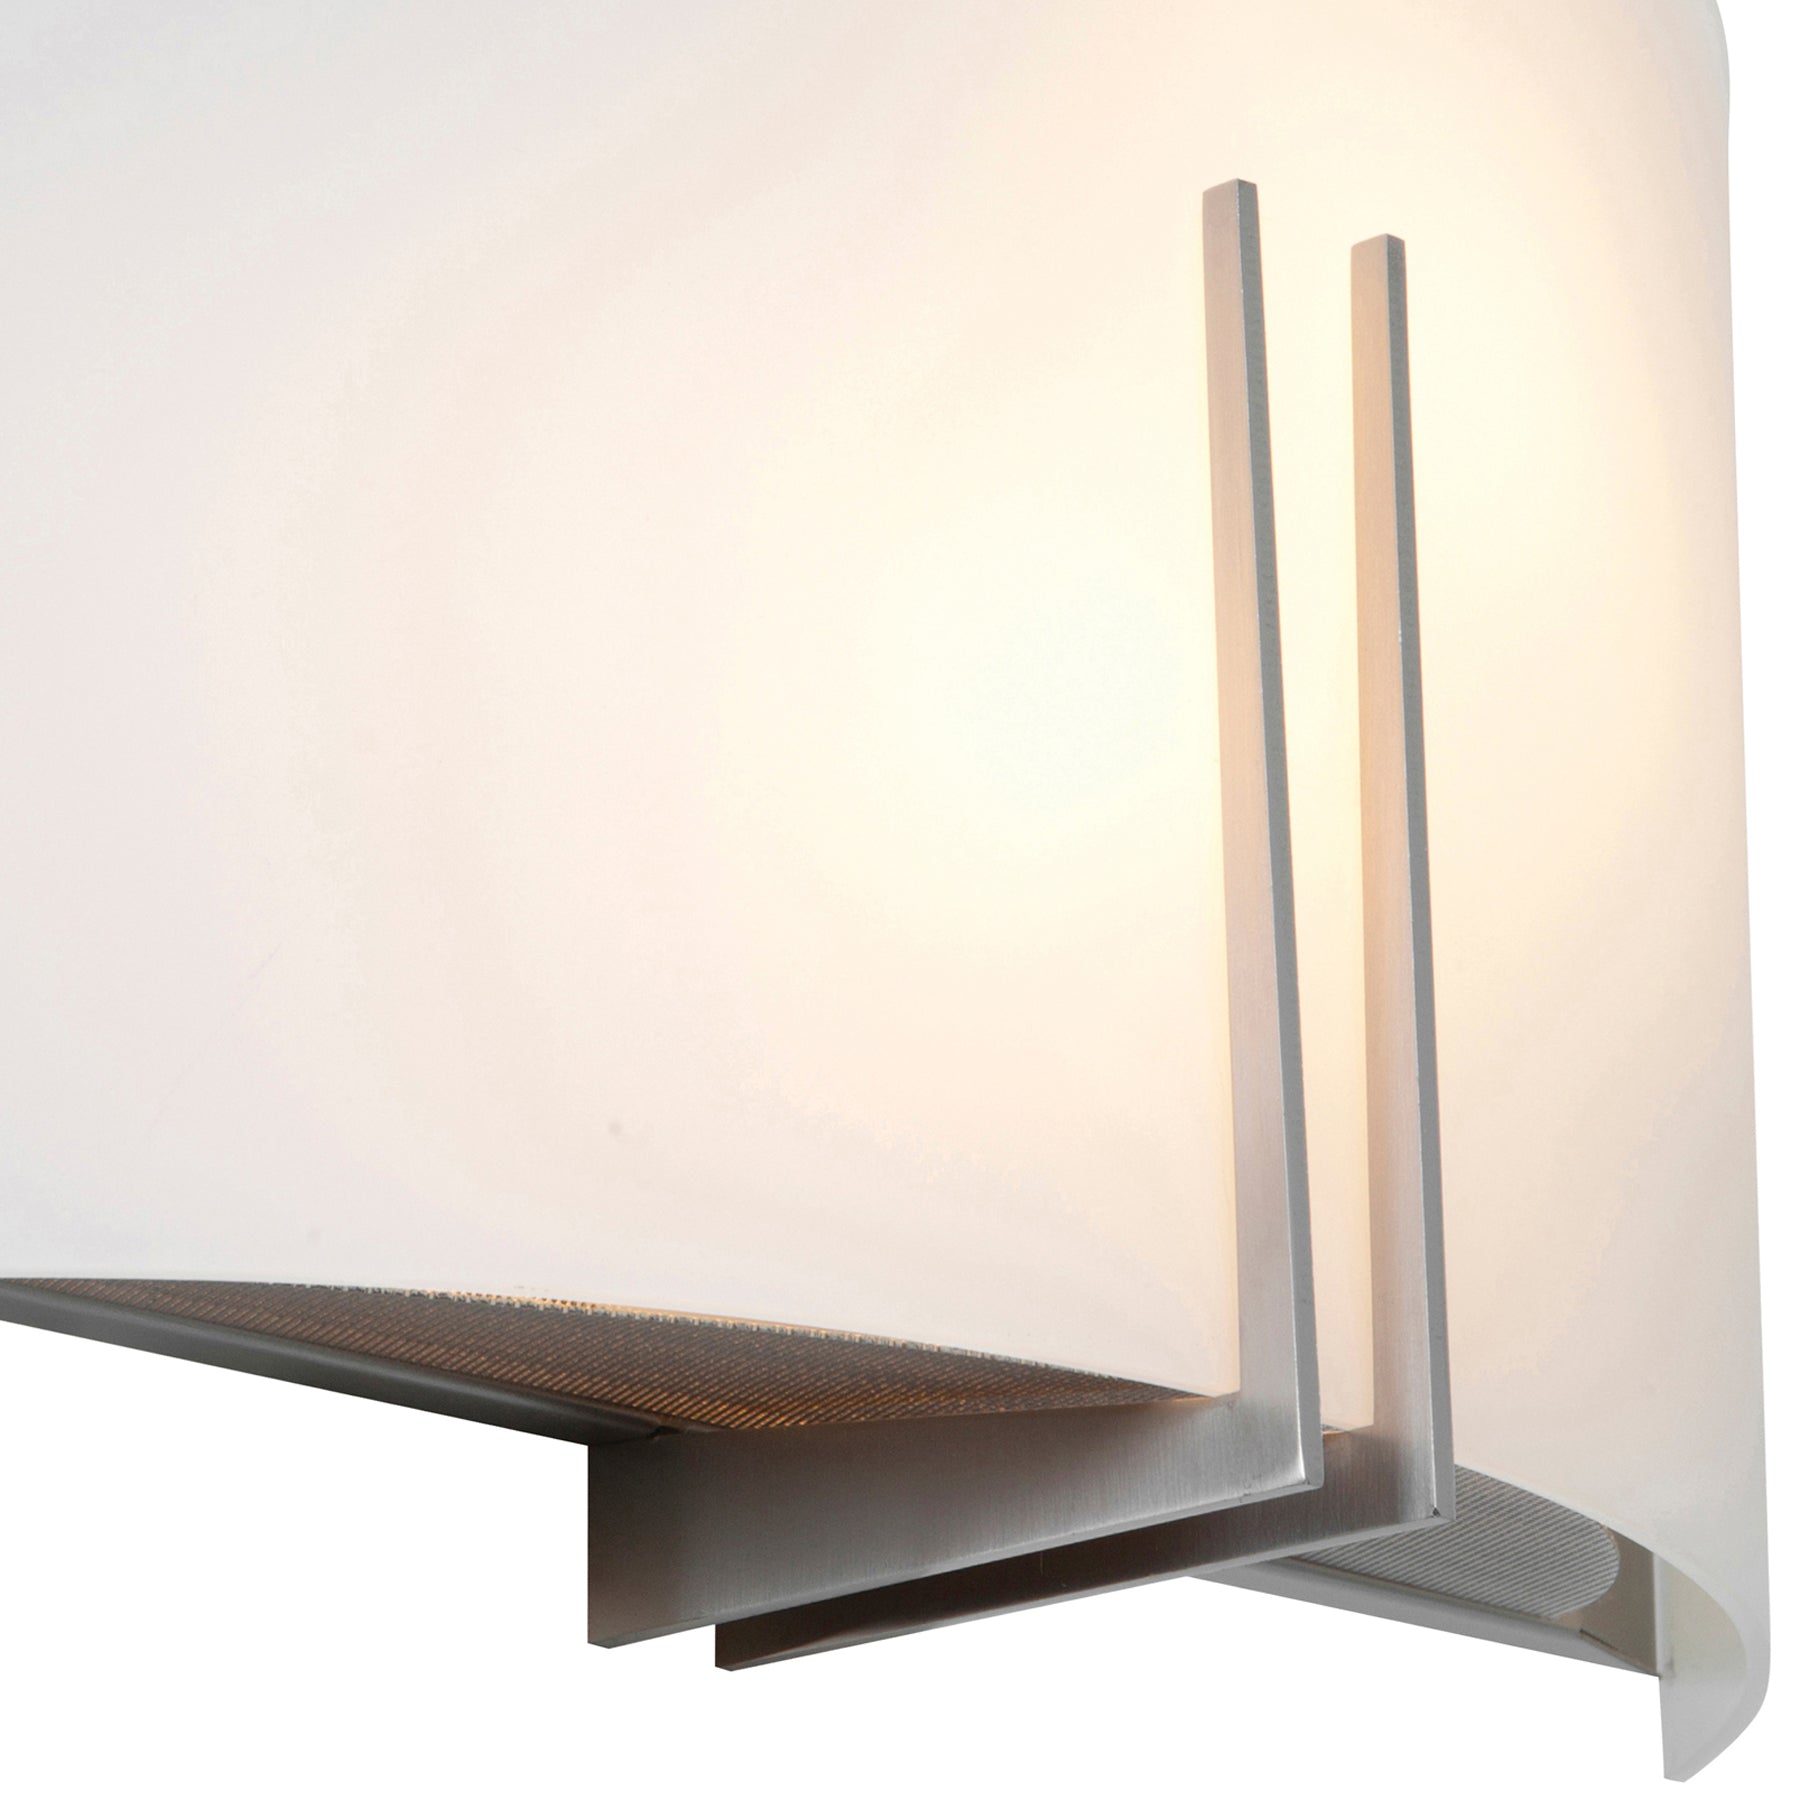 Prong 7.5in. LED Wall Lighting (Brushed Steel)